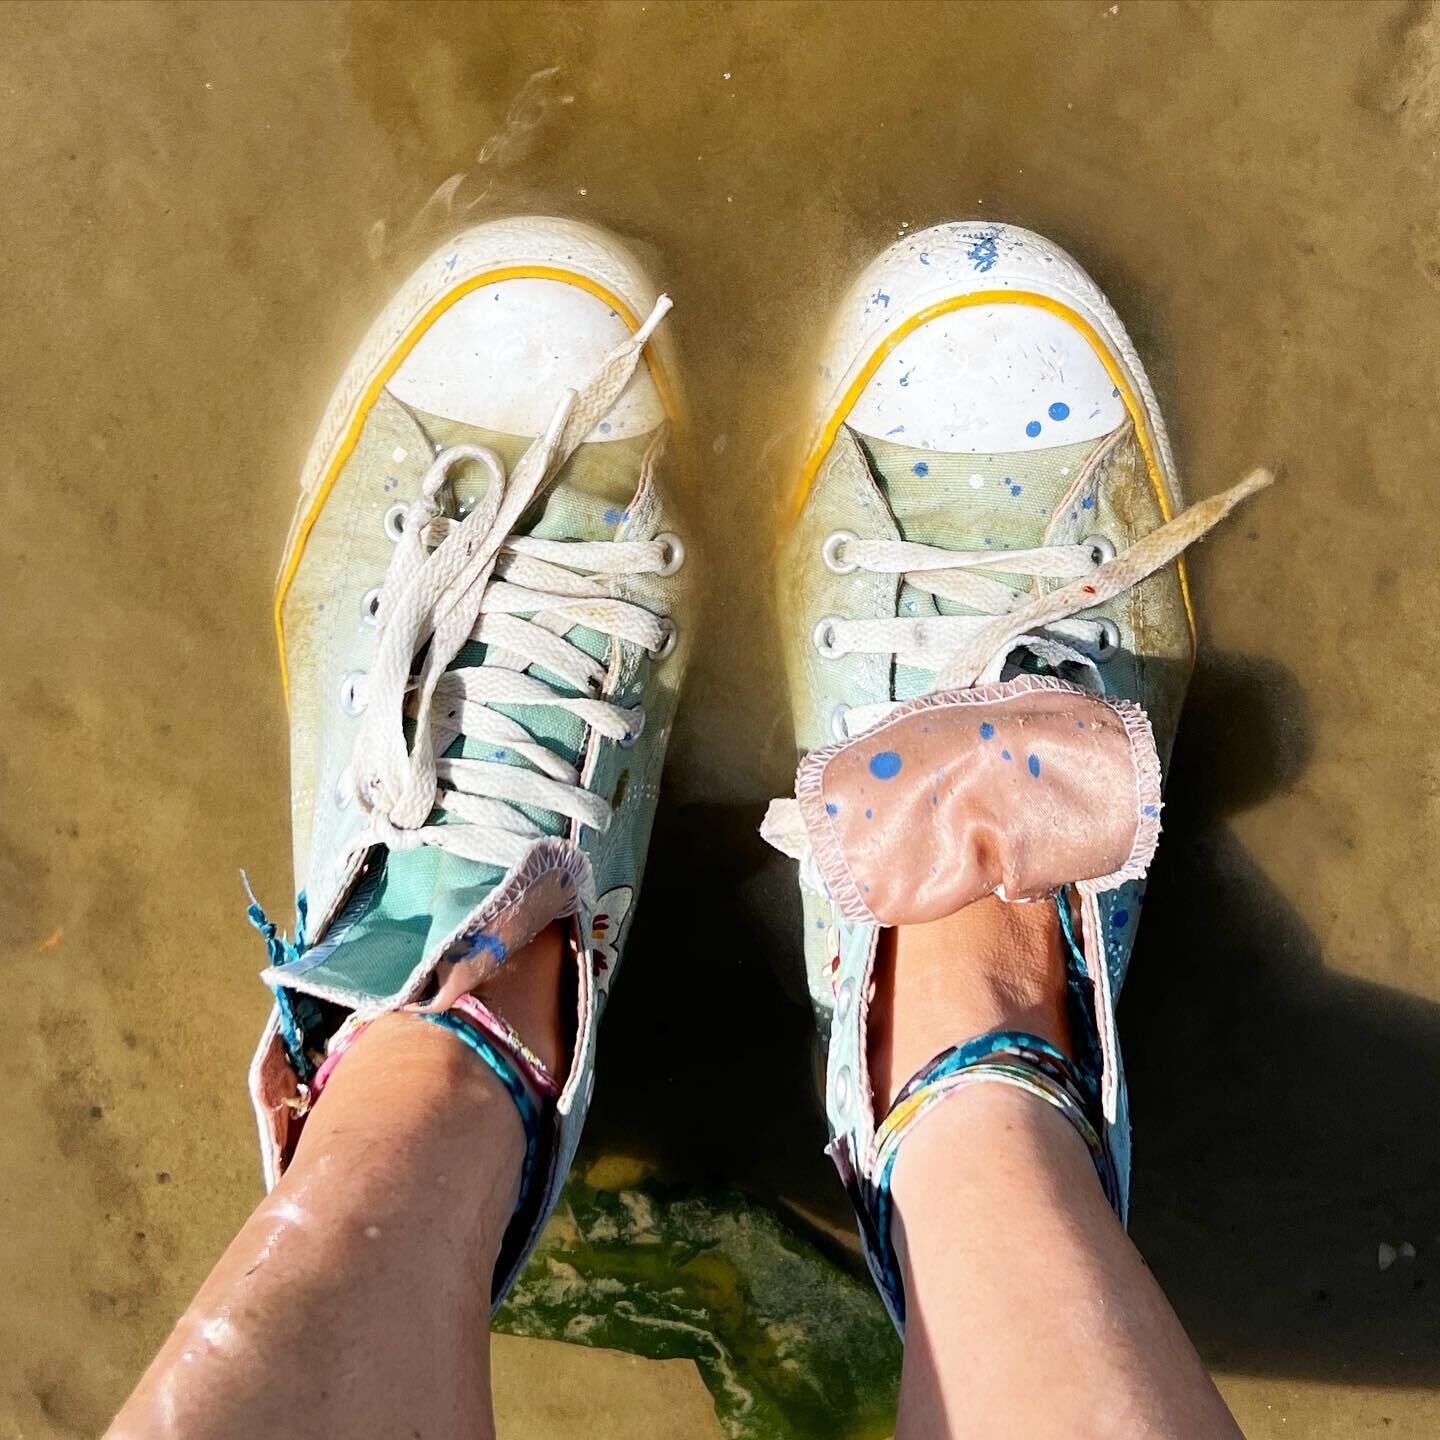 Sometimes you just need to get yer feet wet and get on out there &hellip;.. 

Feel the energy&hellip;

#liveit #converse #beachlife #waterbaby #getoutthere #the_wolf_and_me